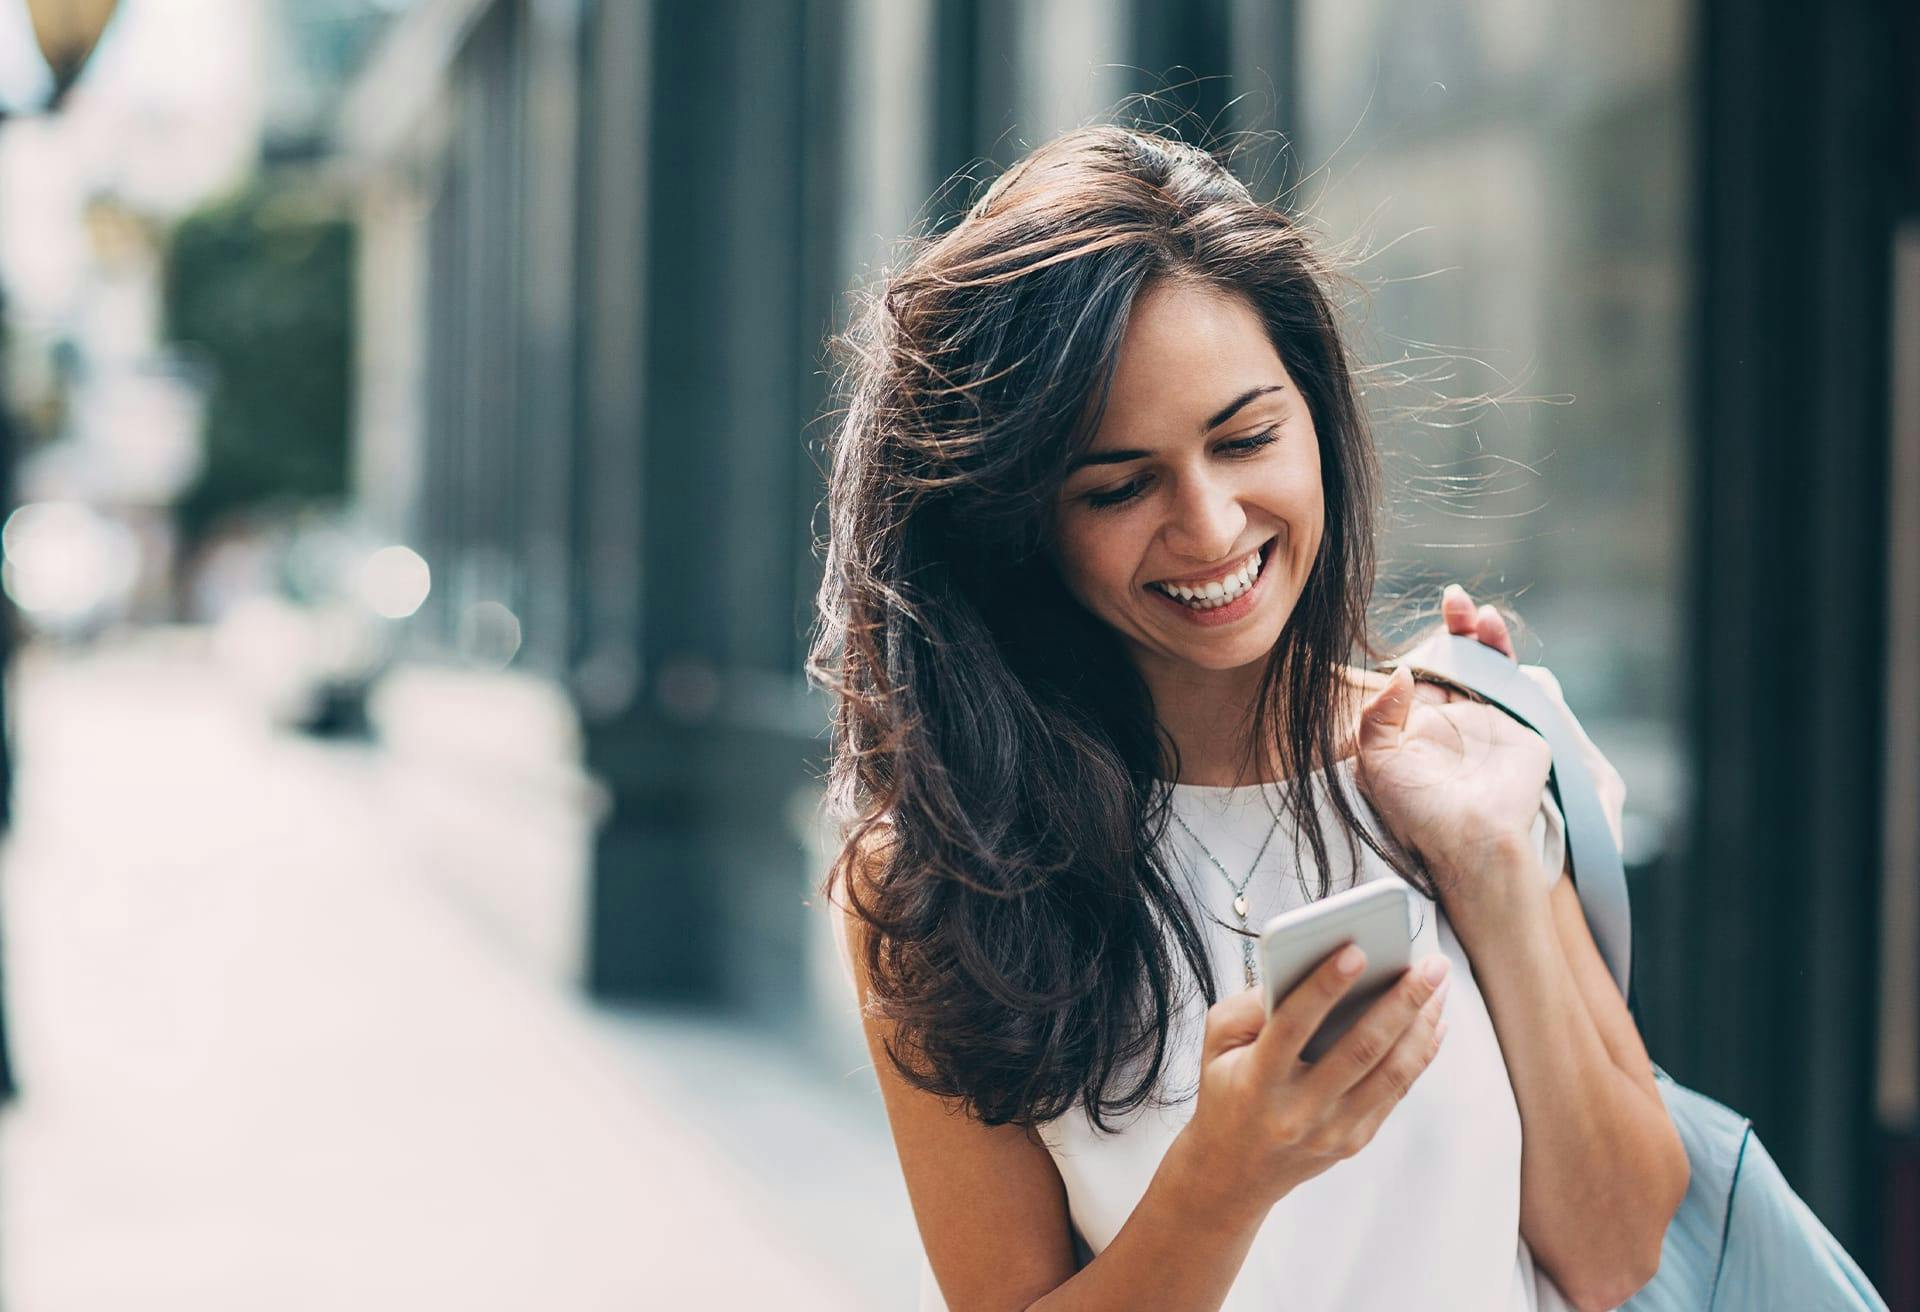 Woman Smiling and Looking at Her Phone